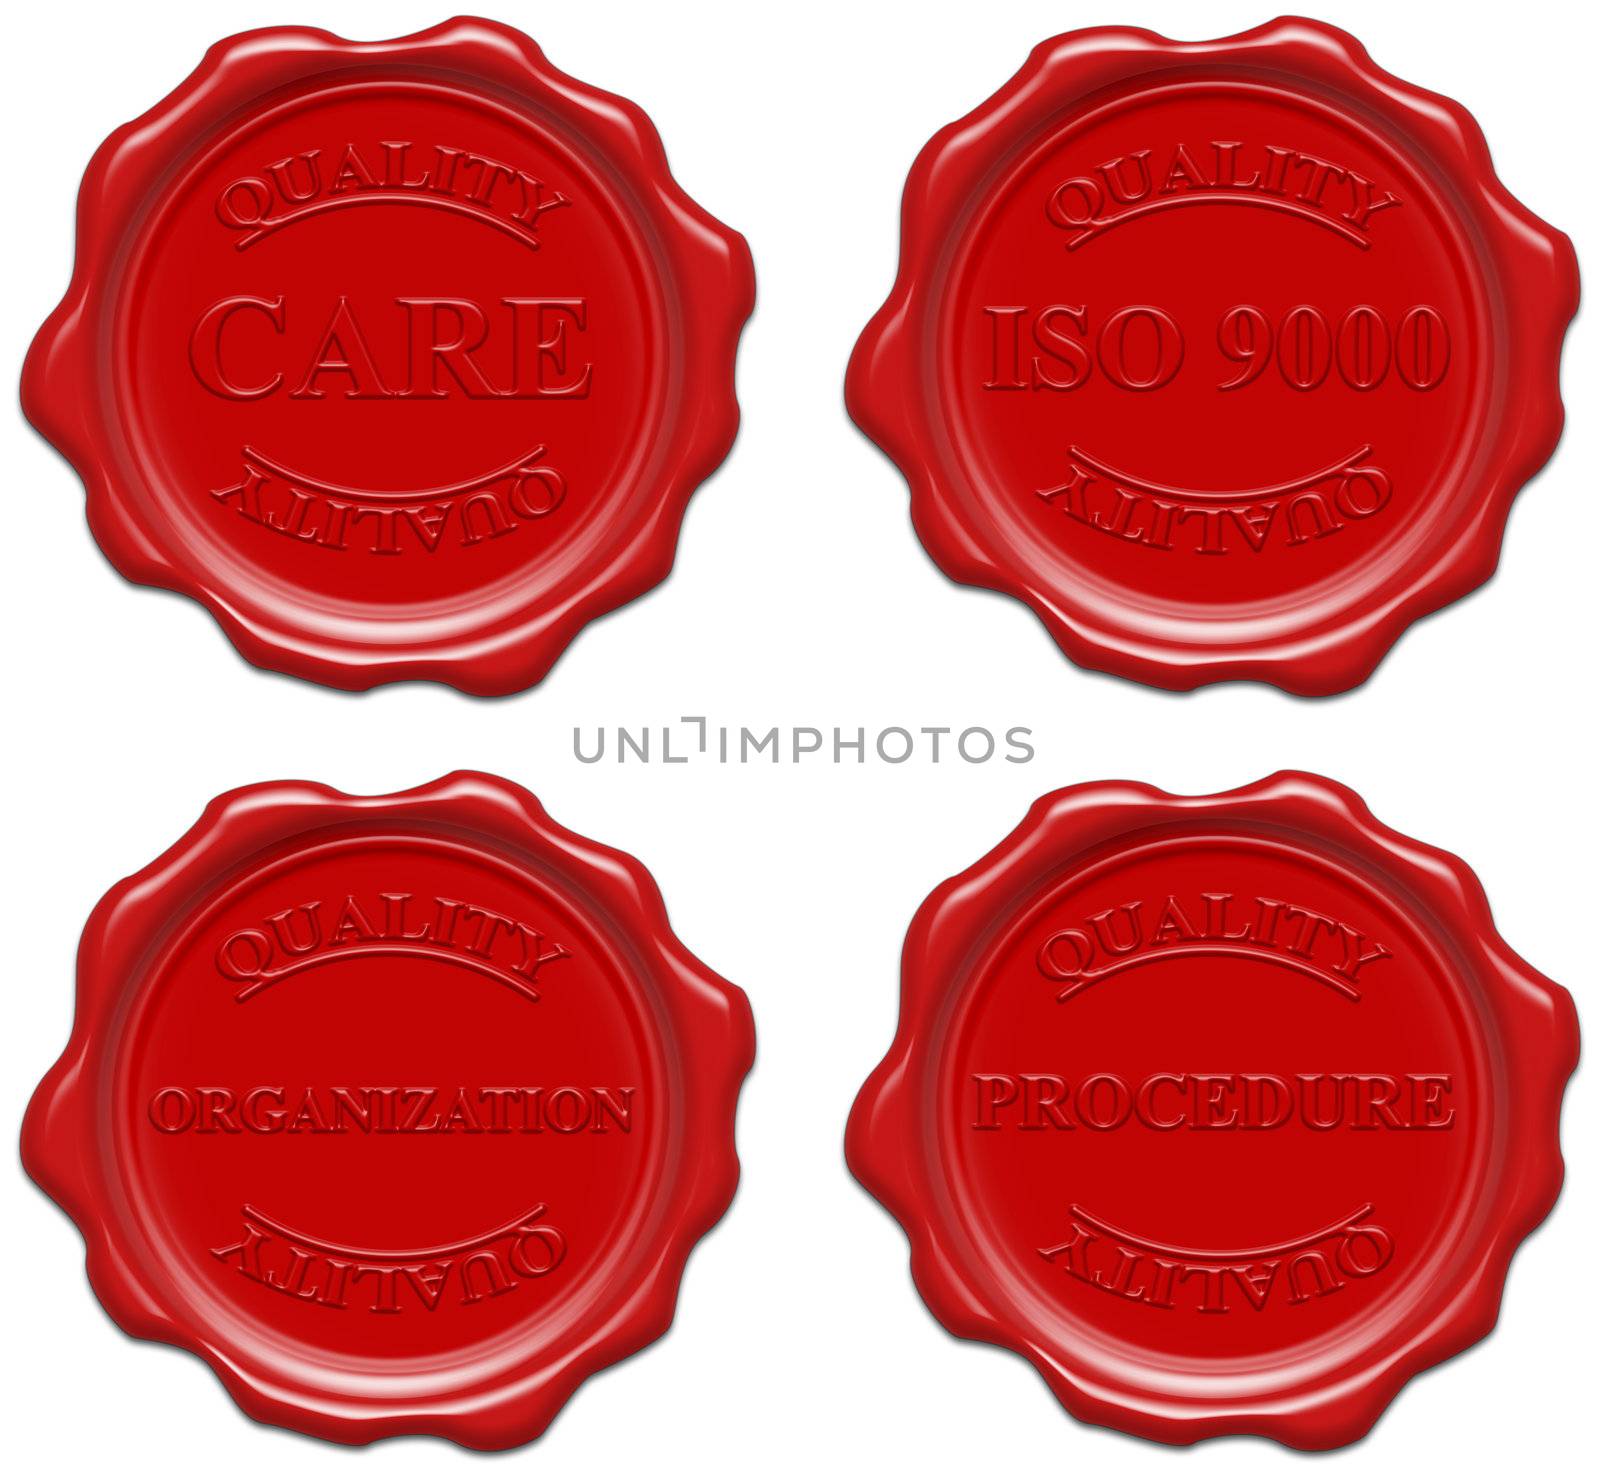 High resolution realistic red wax seal with text : quality, care, iso 9000, organization, procedure